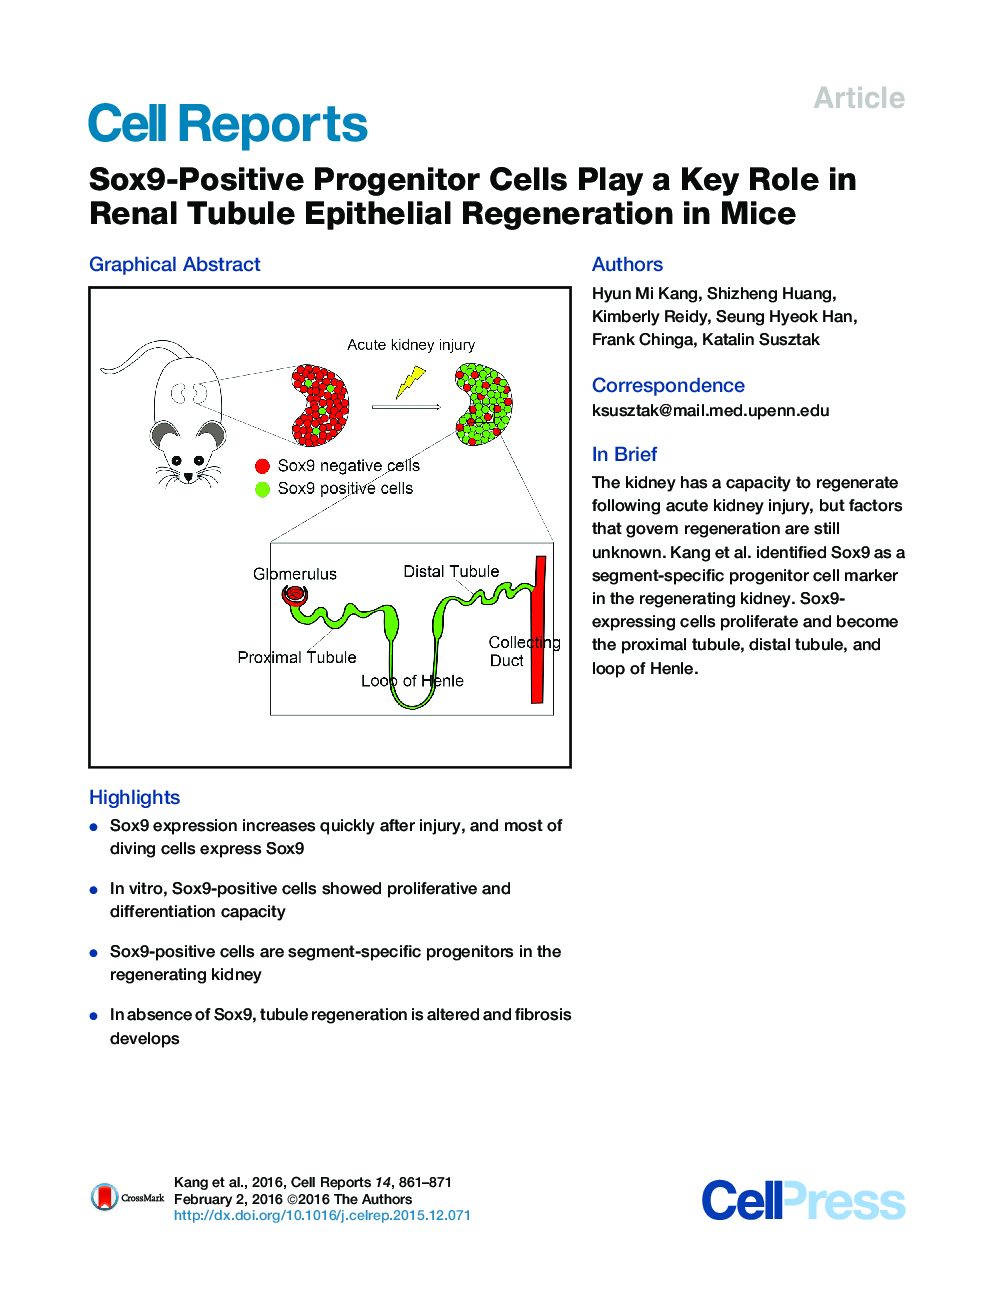 Sox9-Positive Progenitor Cells Play a Key Role in Renal Tubule Epithelial Regeneration in Mice 